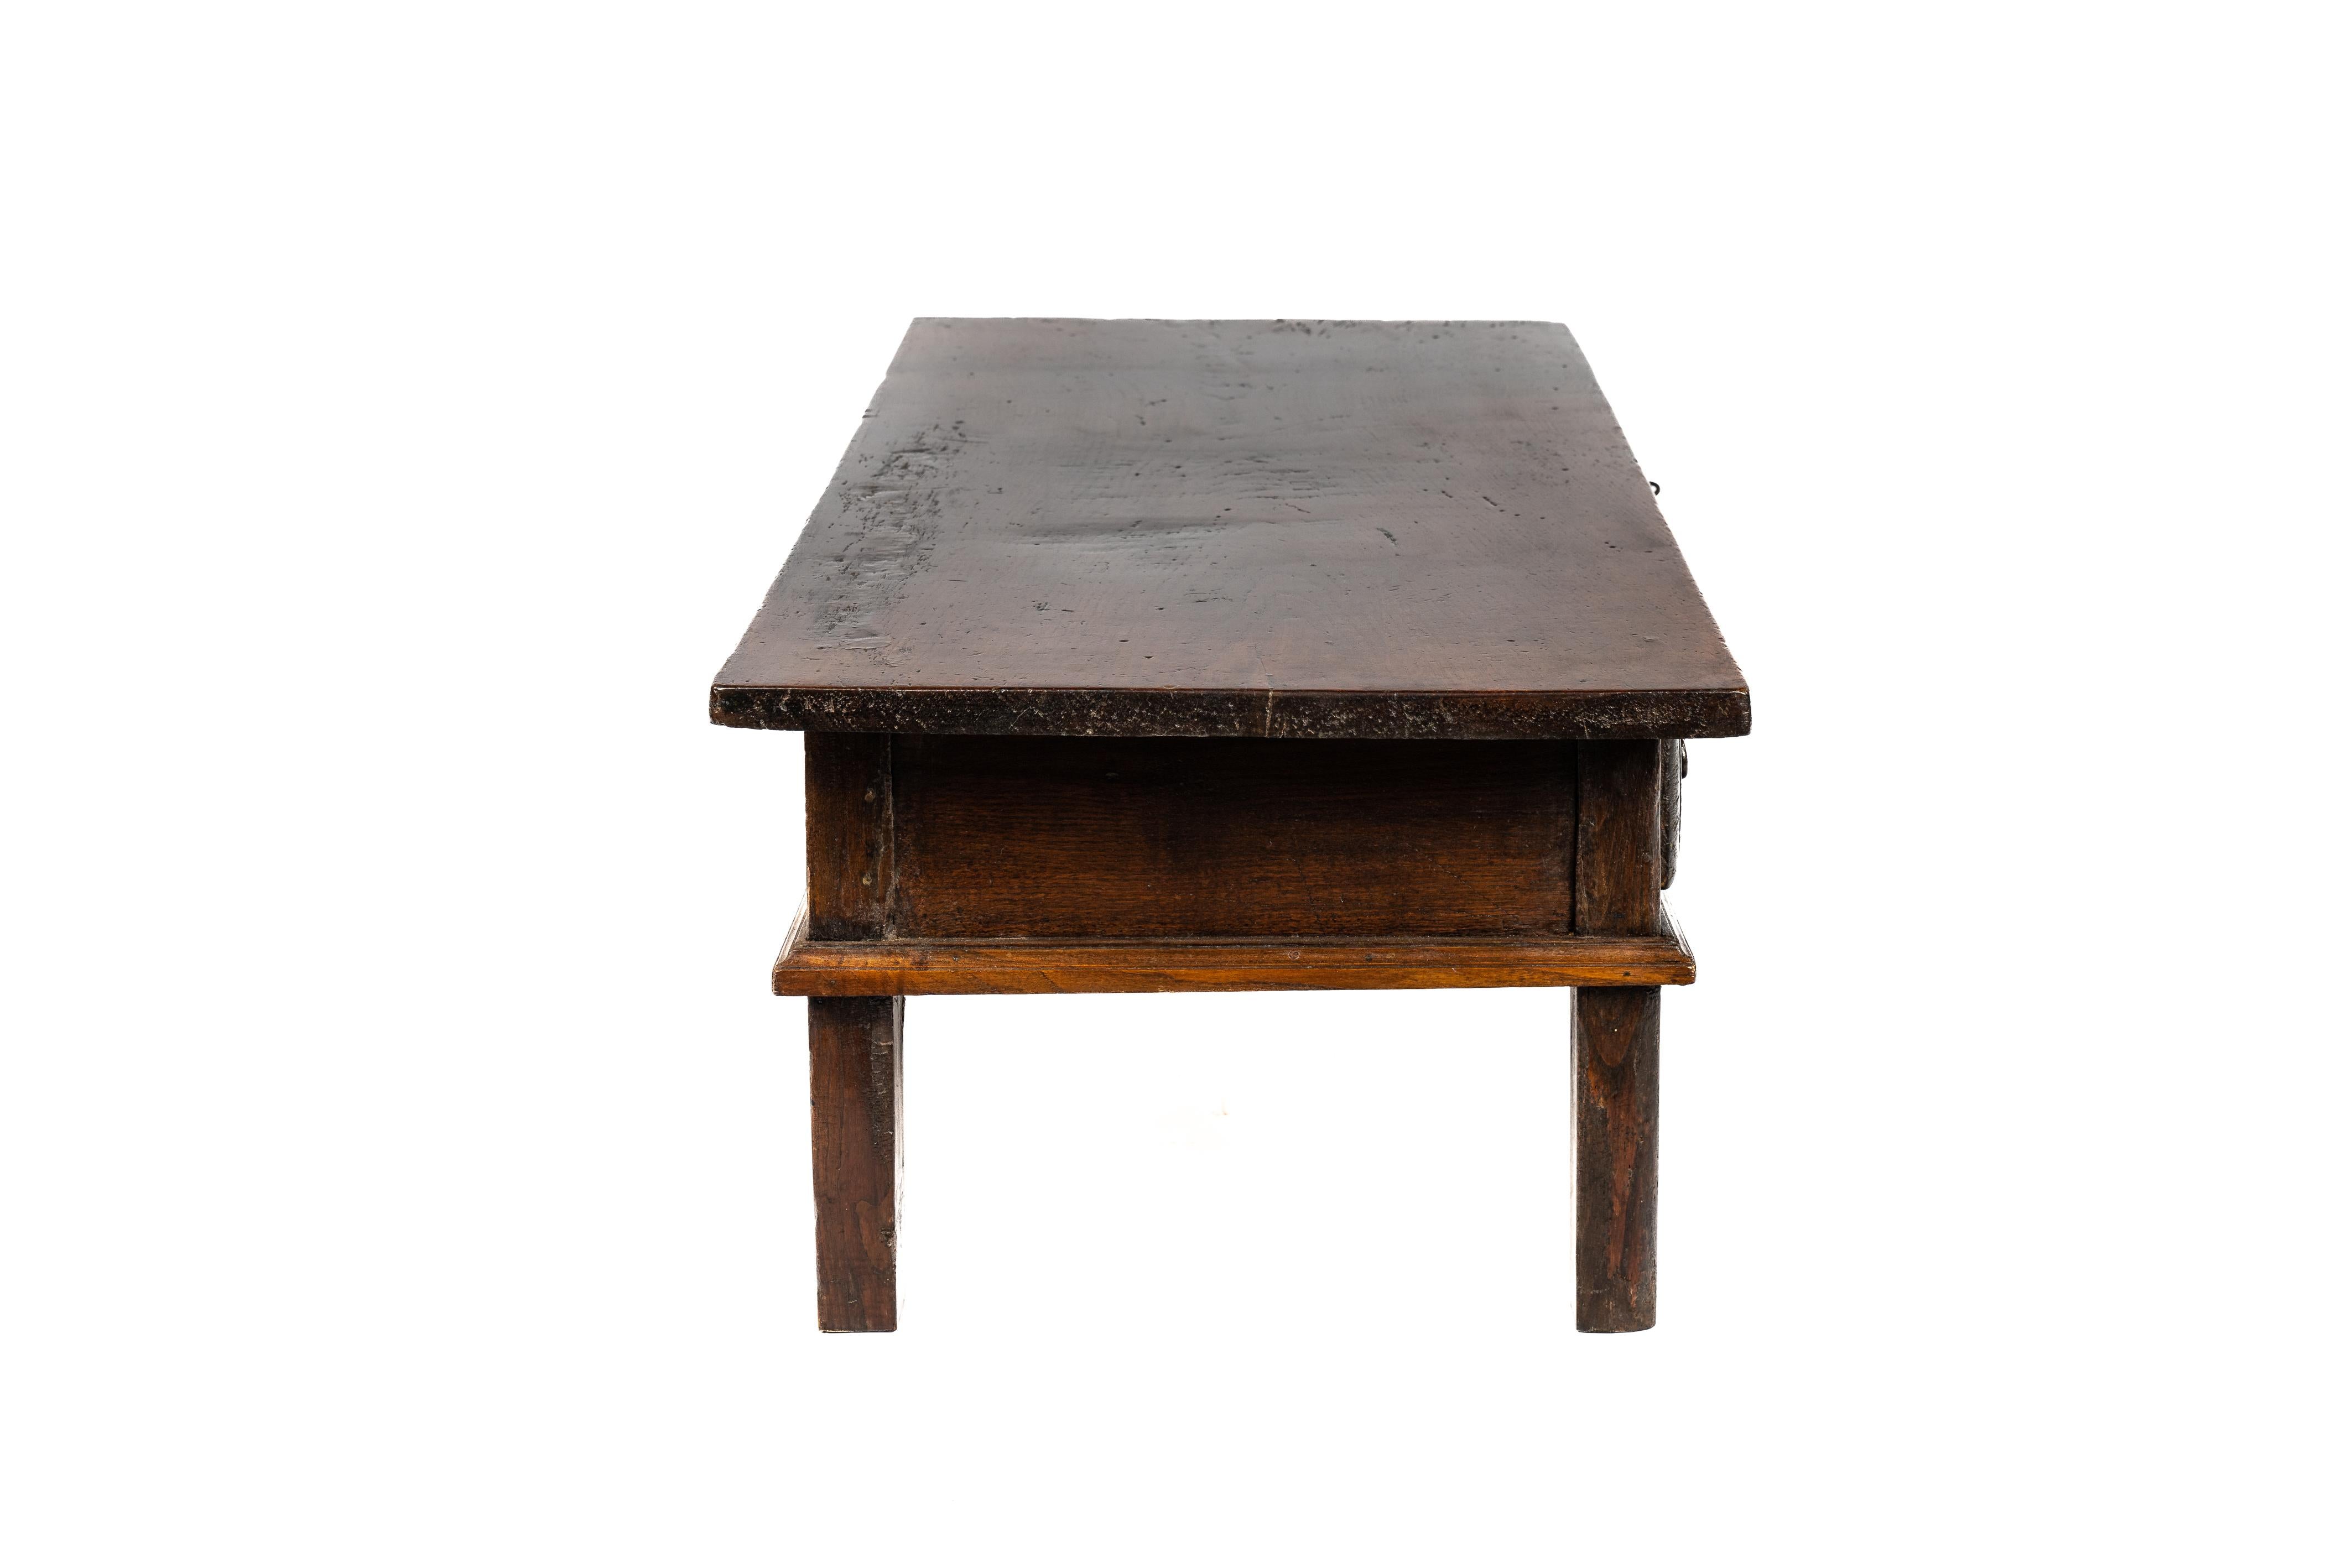 Forged Antique Early 19th Century Rustic Spanish Warm Dark Brown Chestnut Coffee Table For Sale